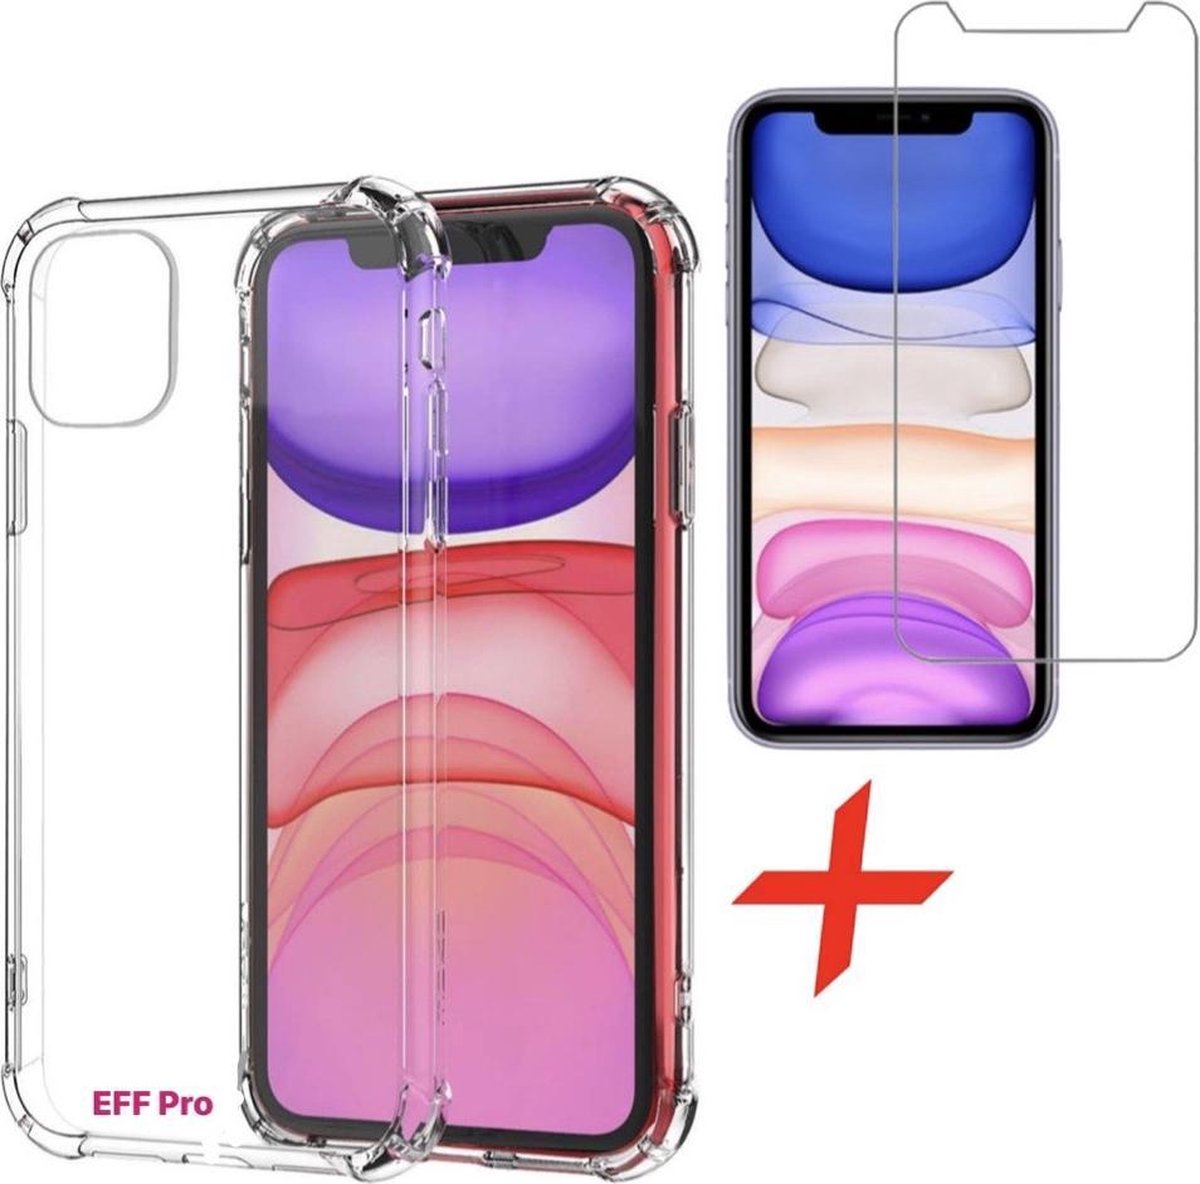 iPhone 11 Pro Max transparent hoesje + Tempered Glass Screen protector. Siliconen TPU Soft Case – Eff Pro